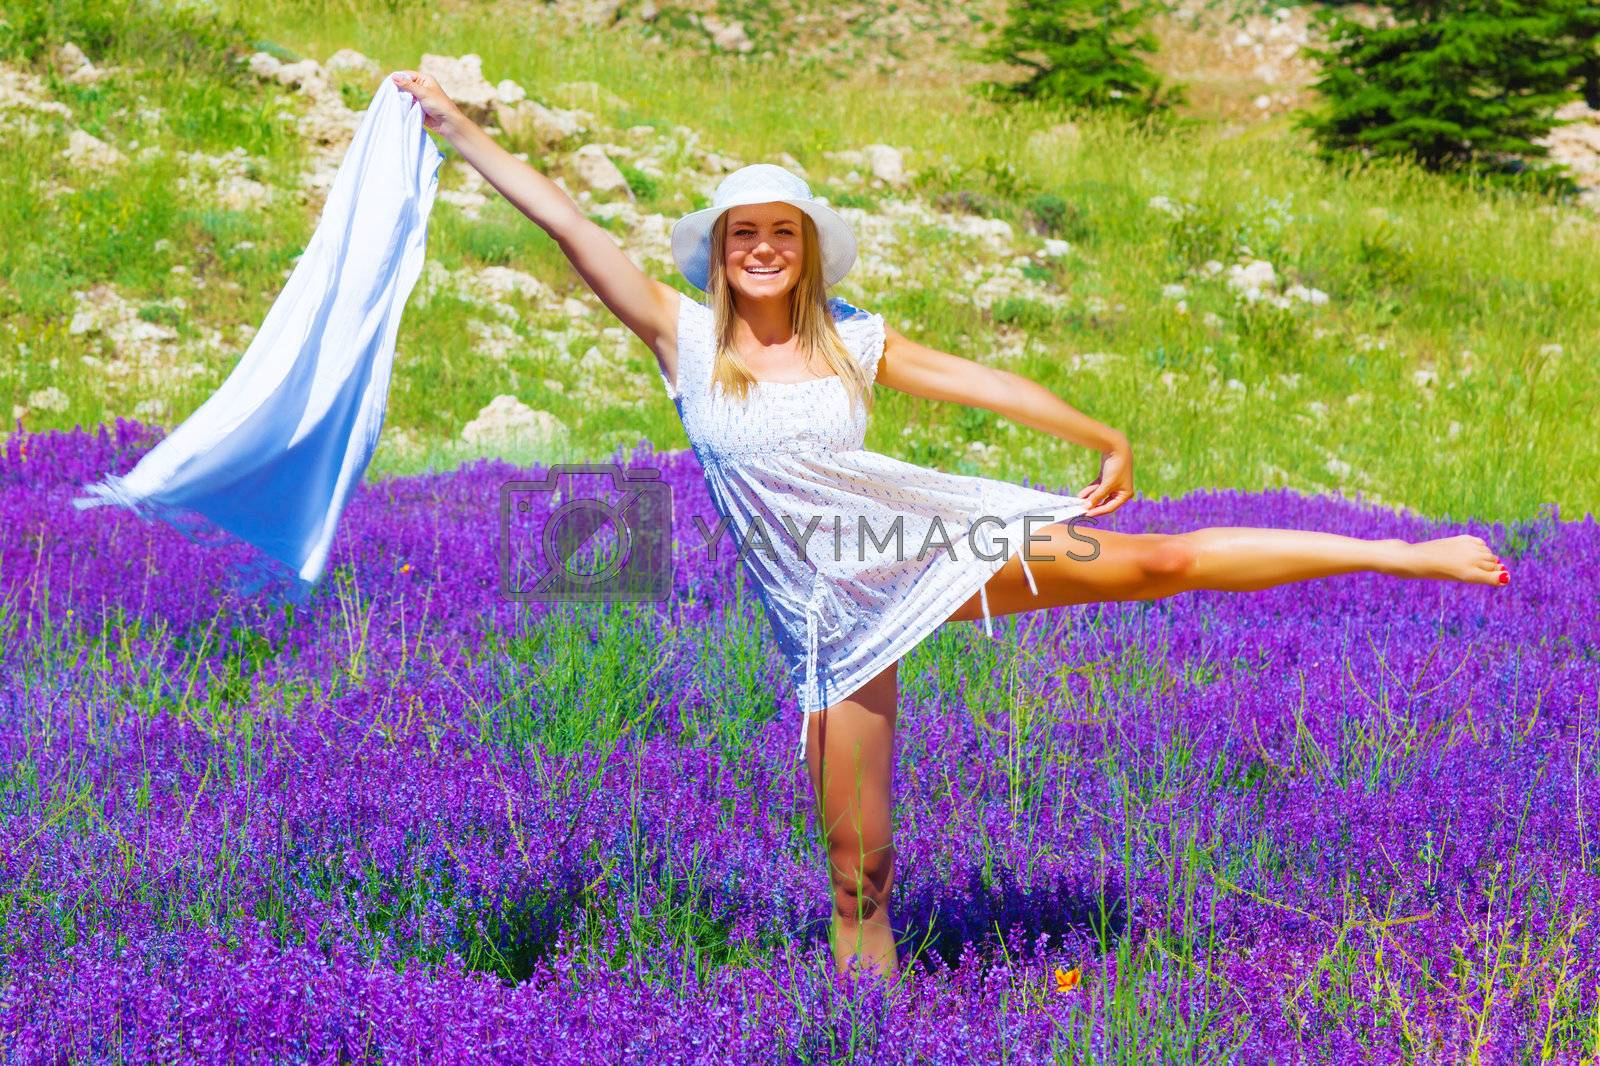 Royalty free image of Female dance on lavender meadow by Anna_Omelchenko